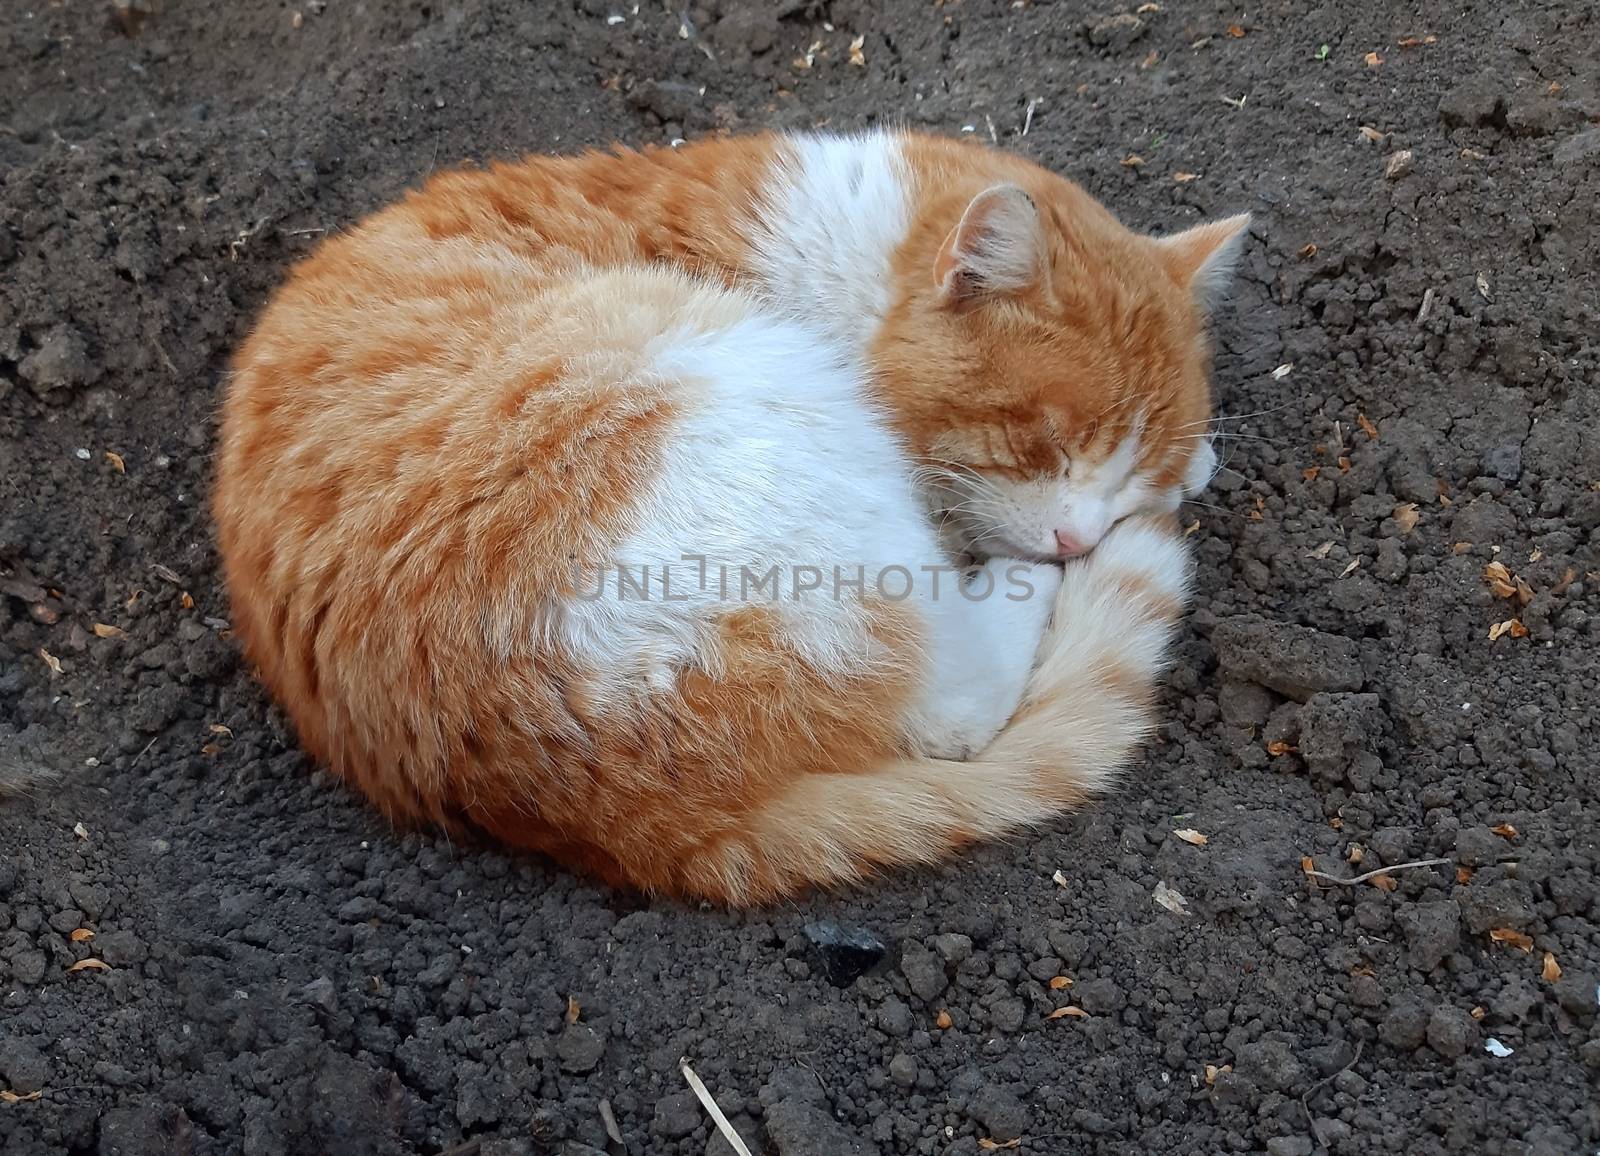 A beautiful orange cat sleeping outside on the surface of the soil.